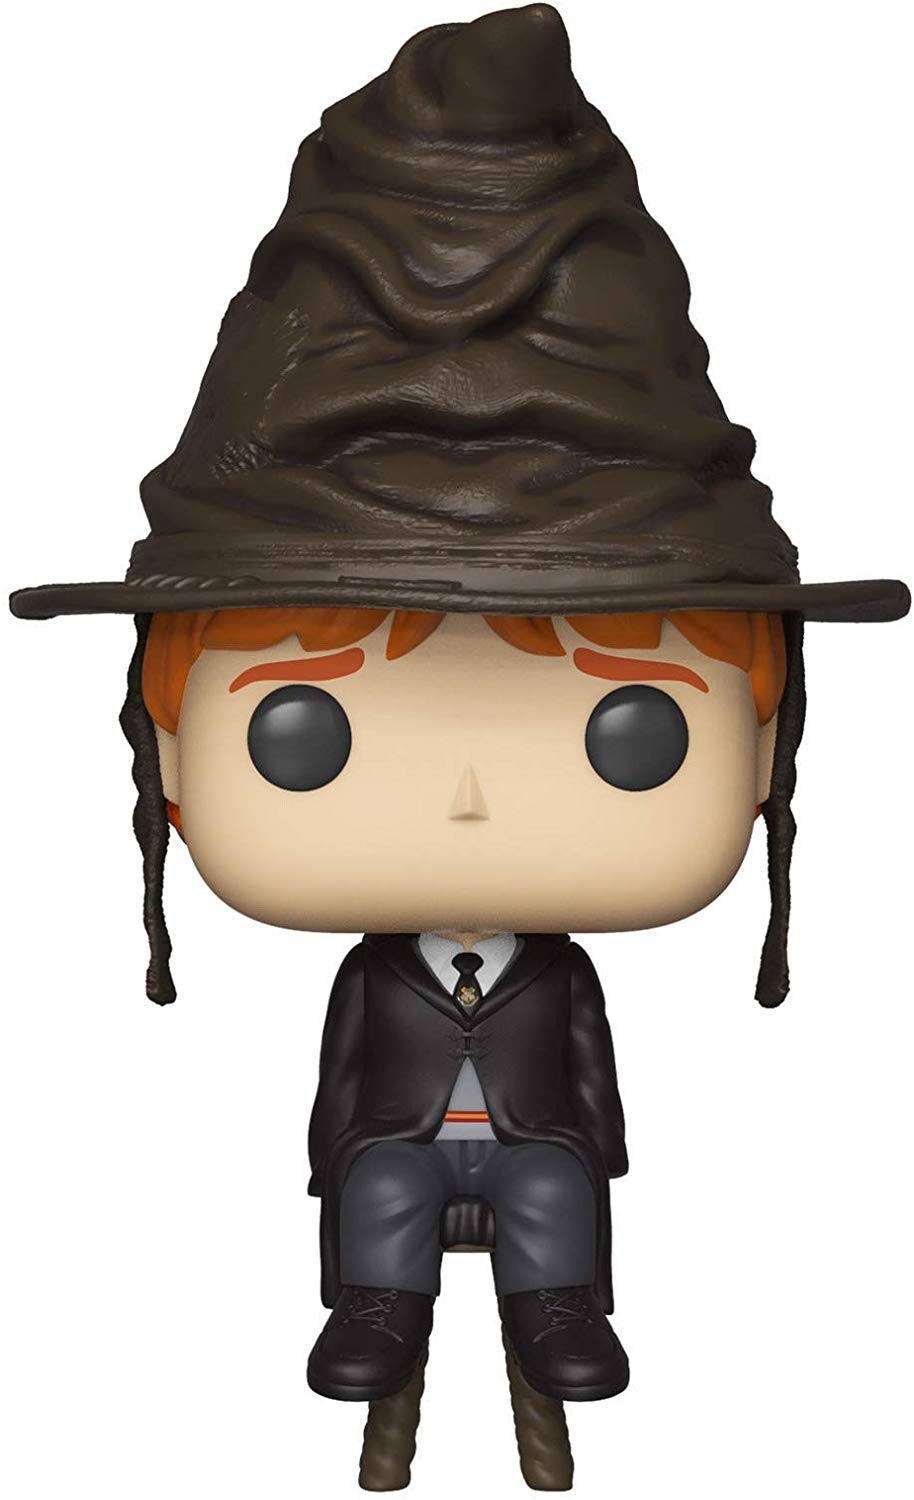 Funko POP! Ron with Sorting Hat Exclusive